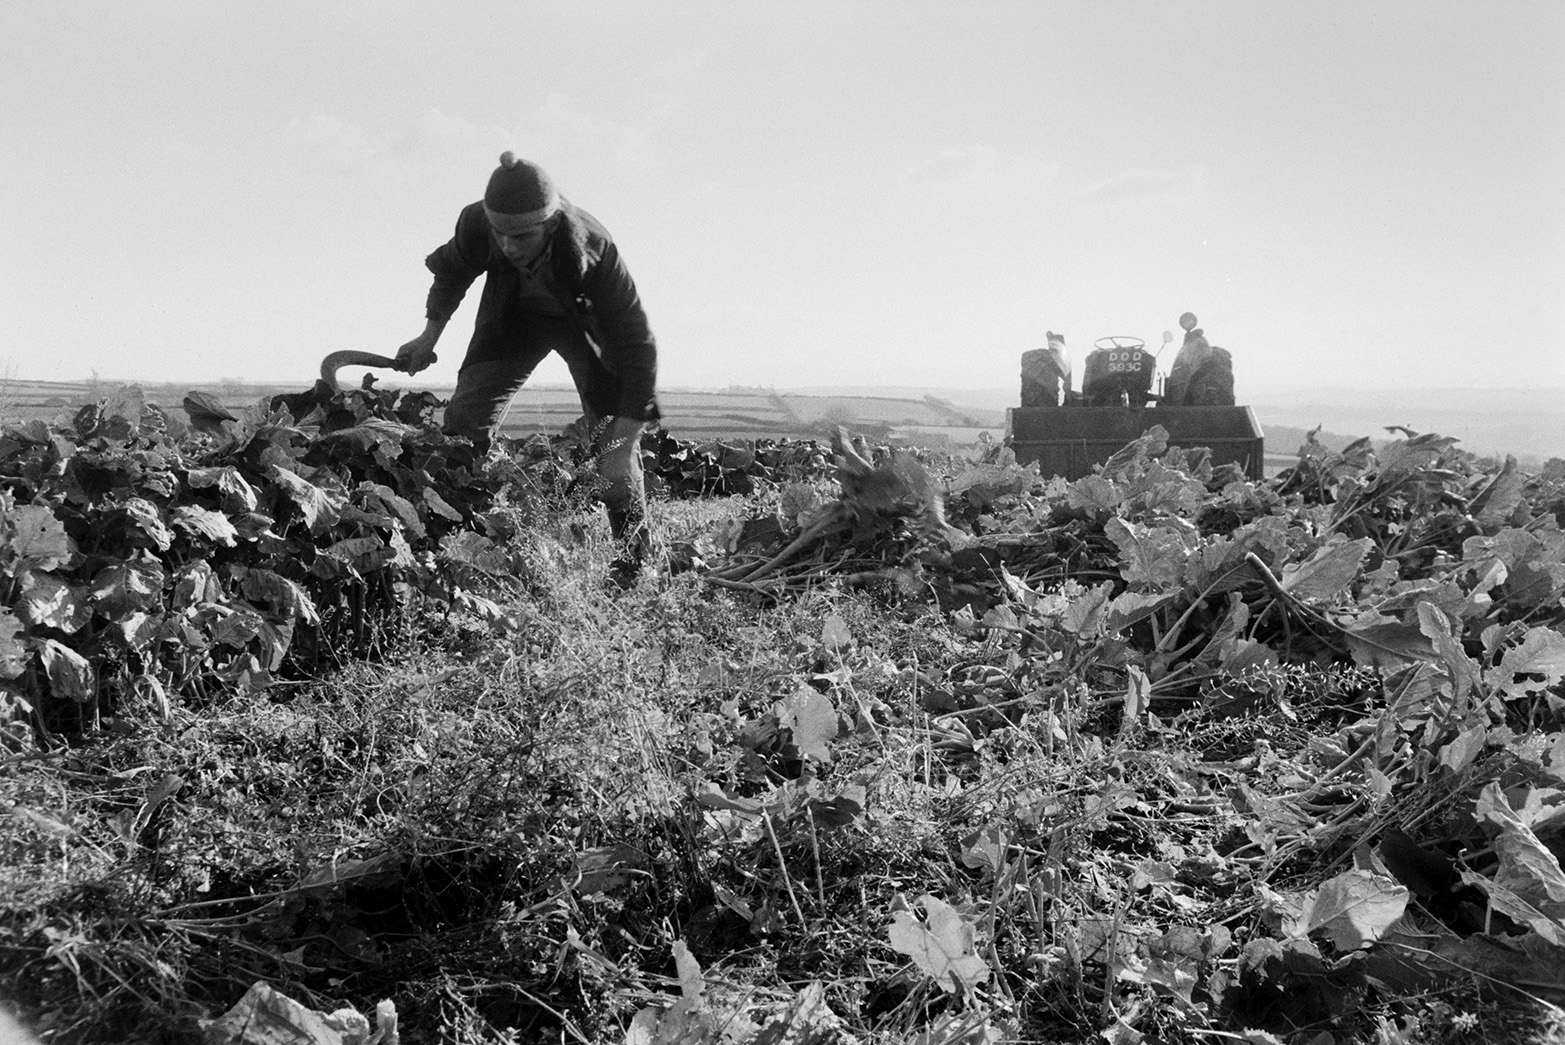 Derek Bright cutting kale for cattle using a bill hook, in a field at Mill Road Farm, Beaford. The farm was also known as Jeffrys.